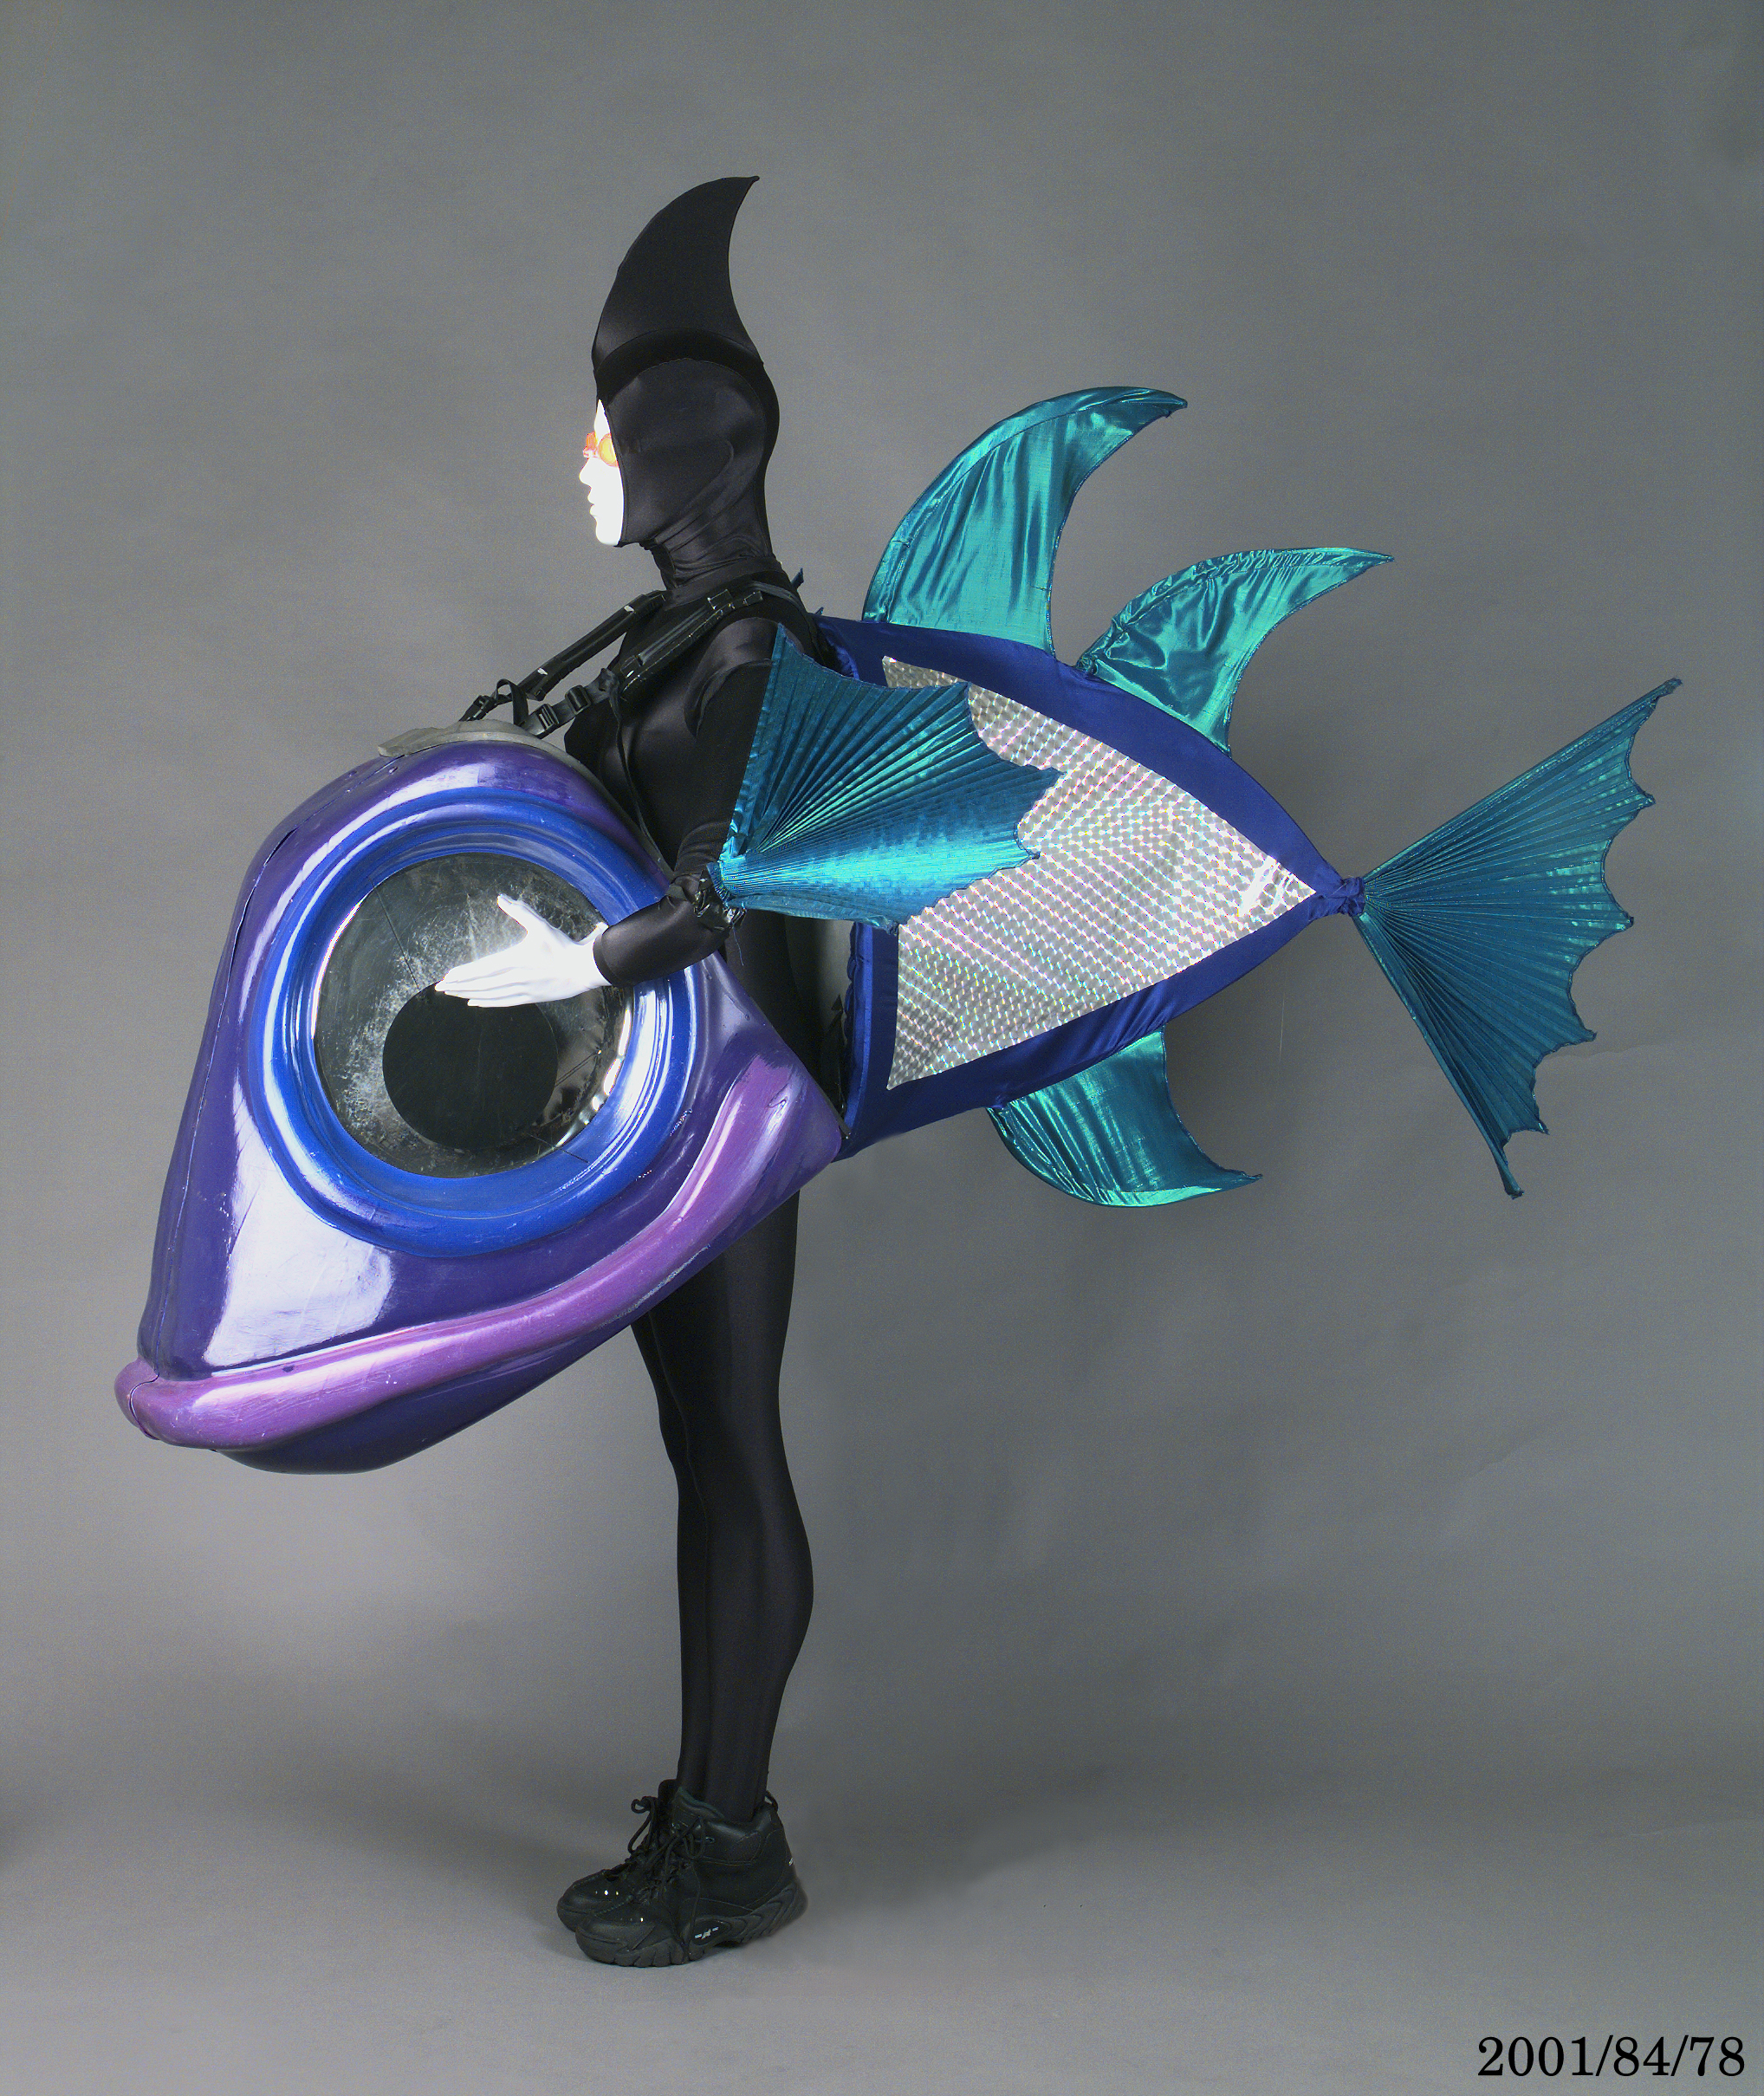 'School fish' costume used in the Sydney Olympic Games Opening Ceremony